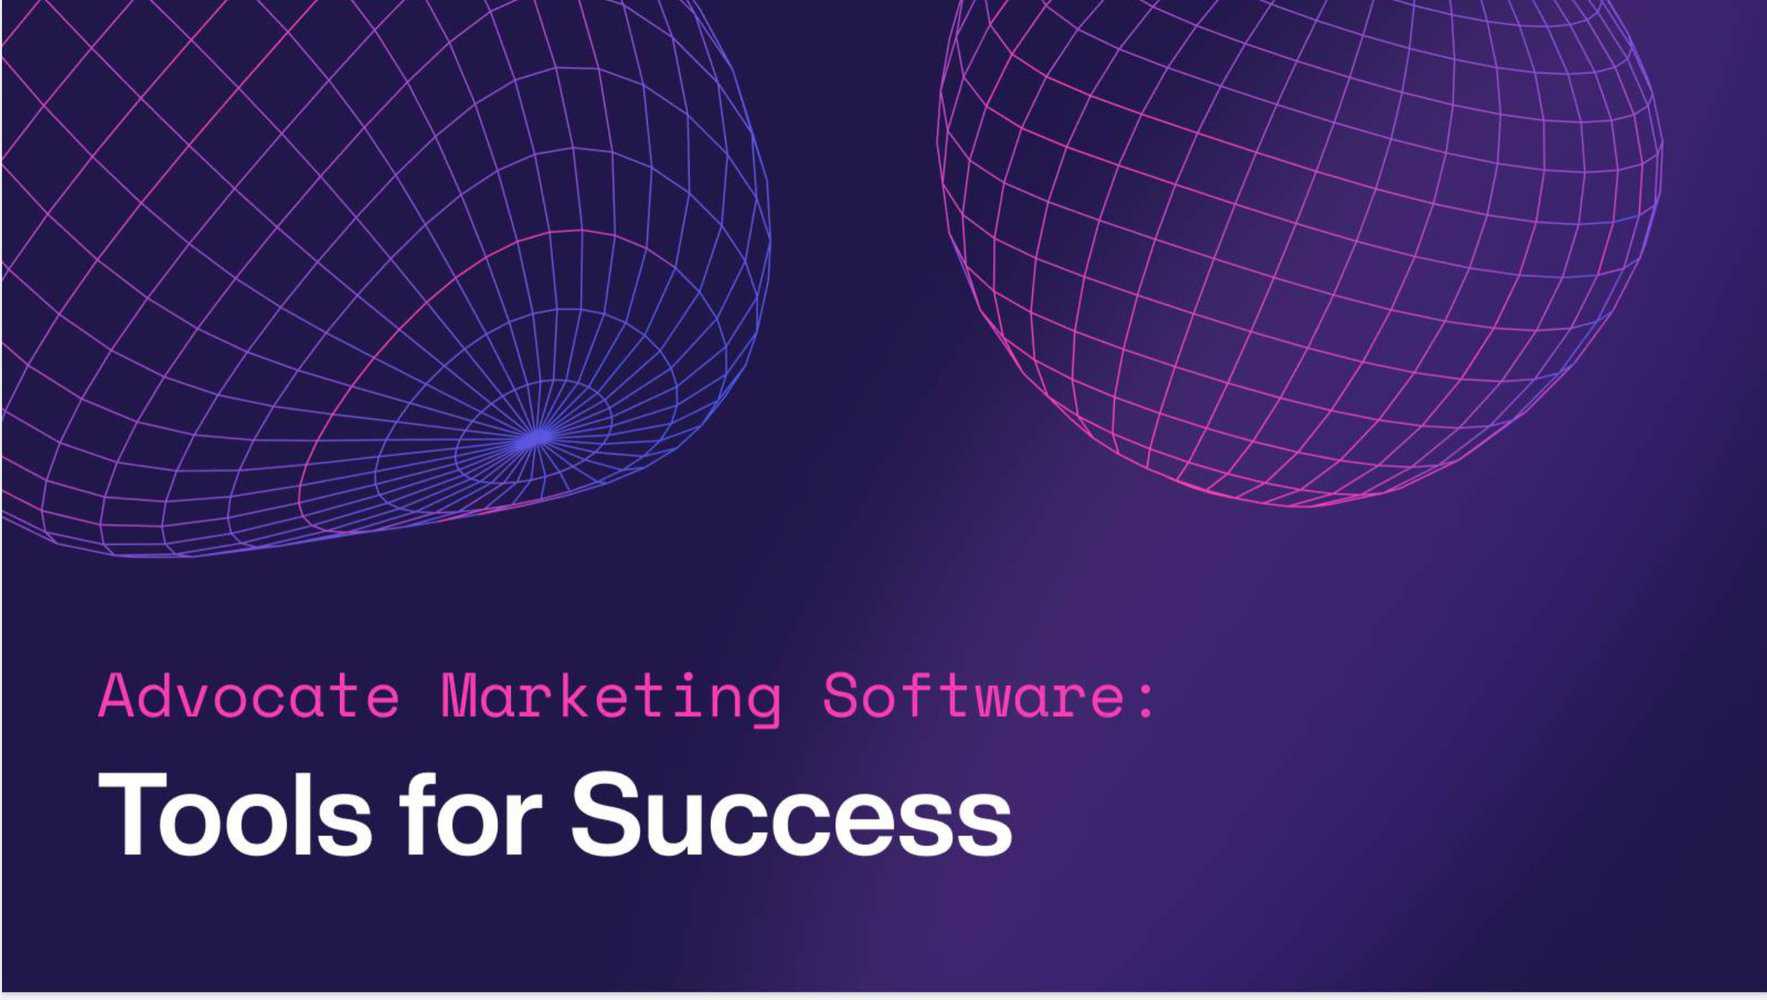 Advocate Marketing Software: Tools for Success